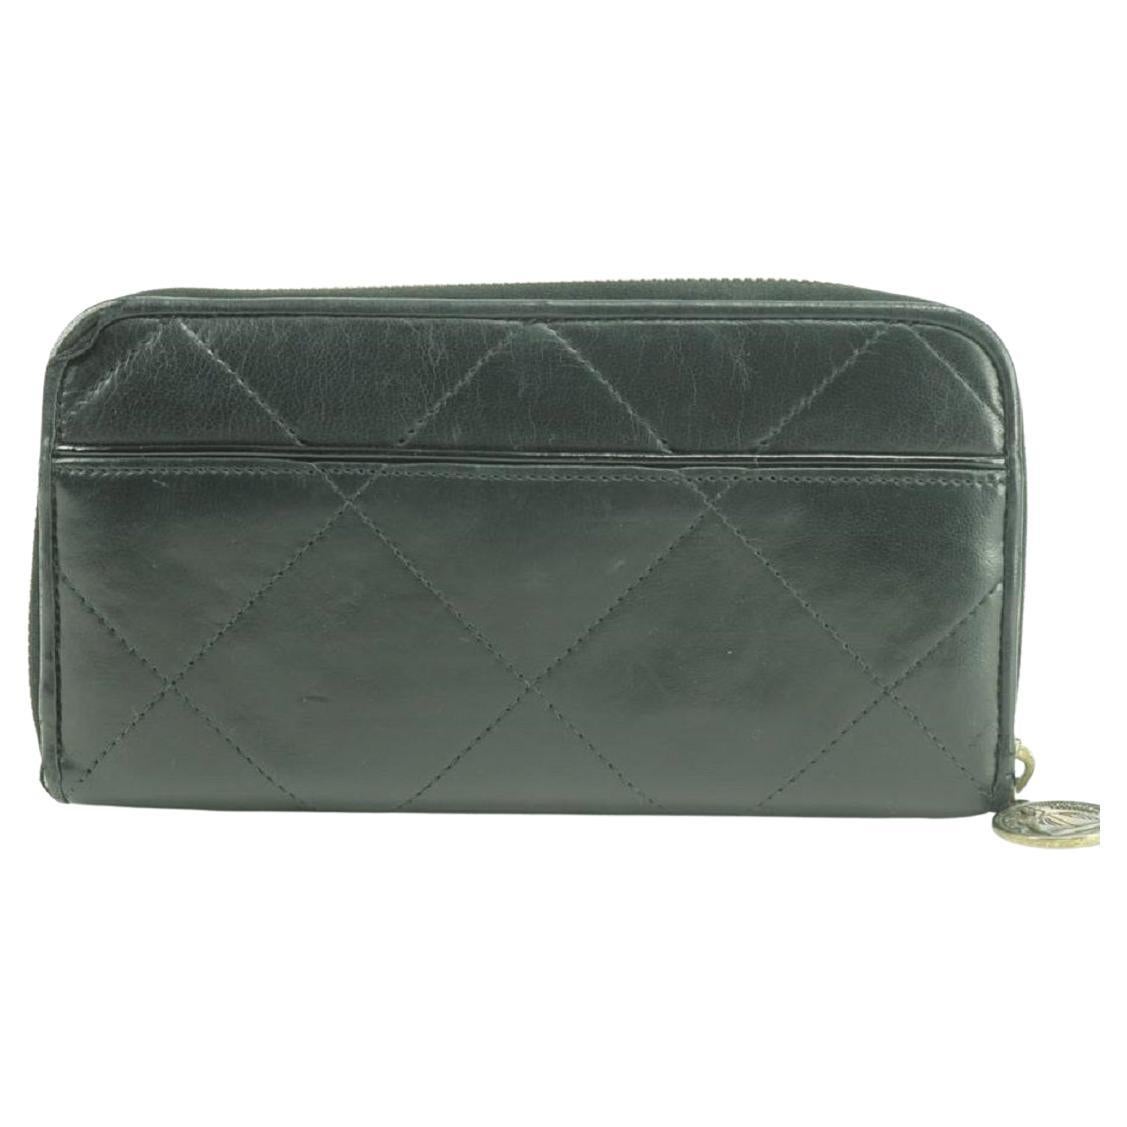 Lanvin Black Zippy Clutch Quilted Long Leather Zip Around 21lk0123 Wallet For Sale